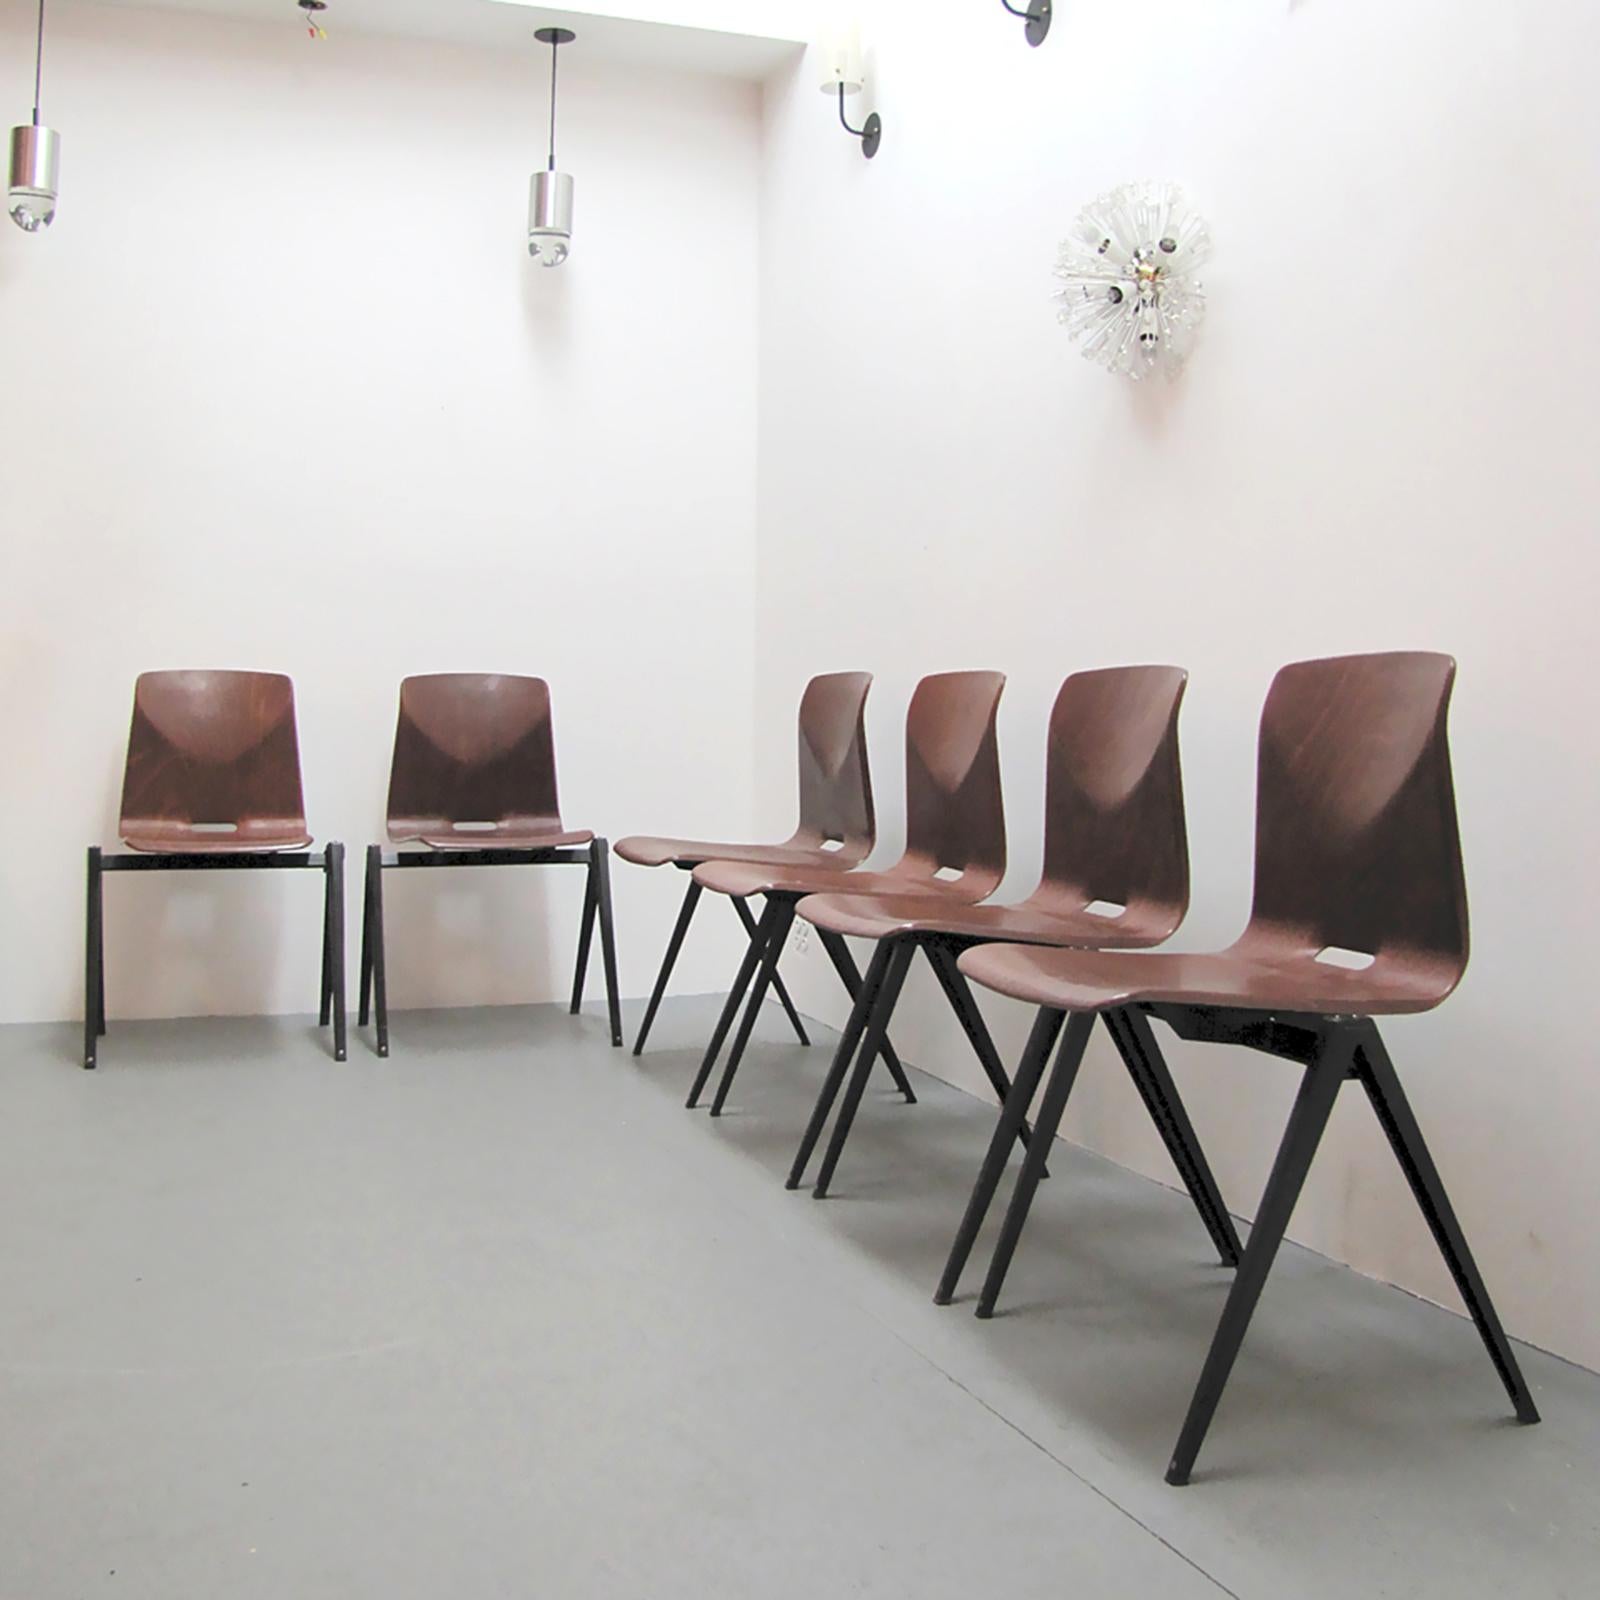 Late 20th Century Industrial Dining Chairs by Elmar Flötotto , 1970 For Sale